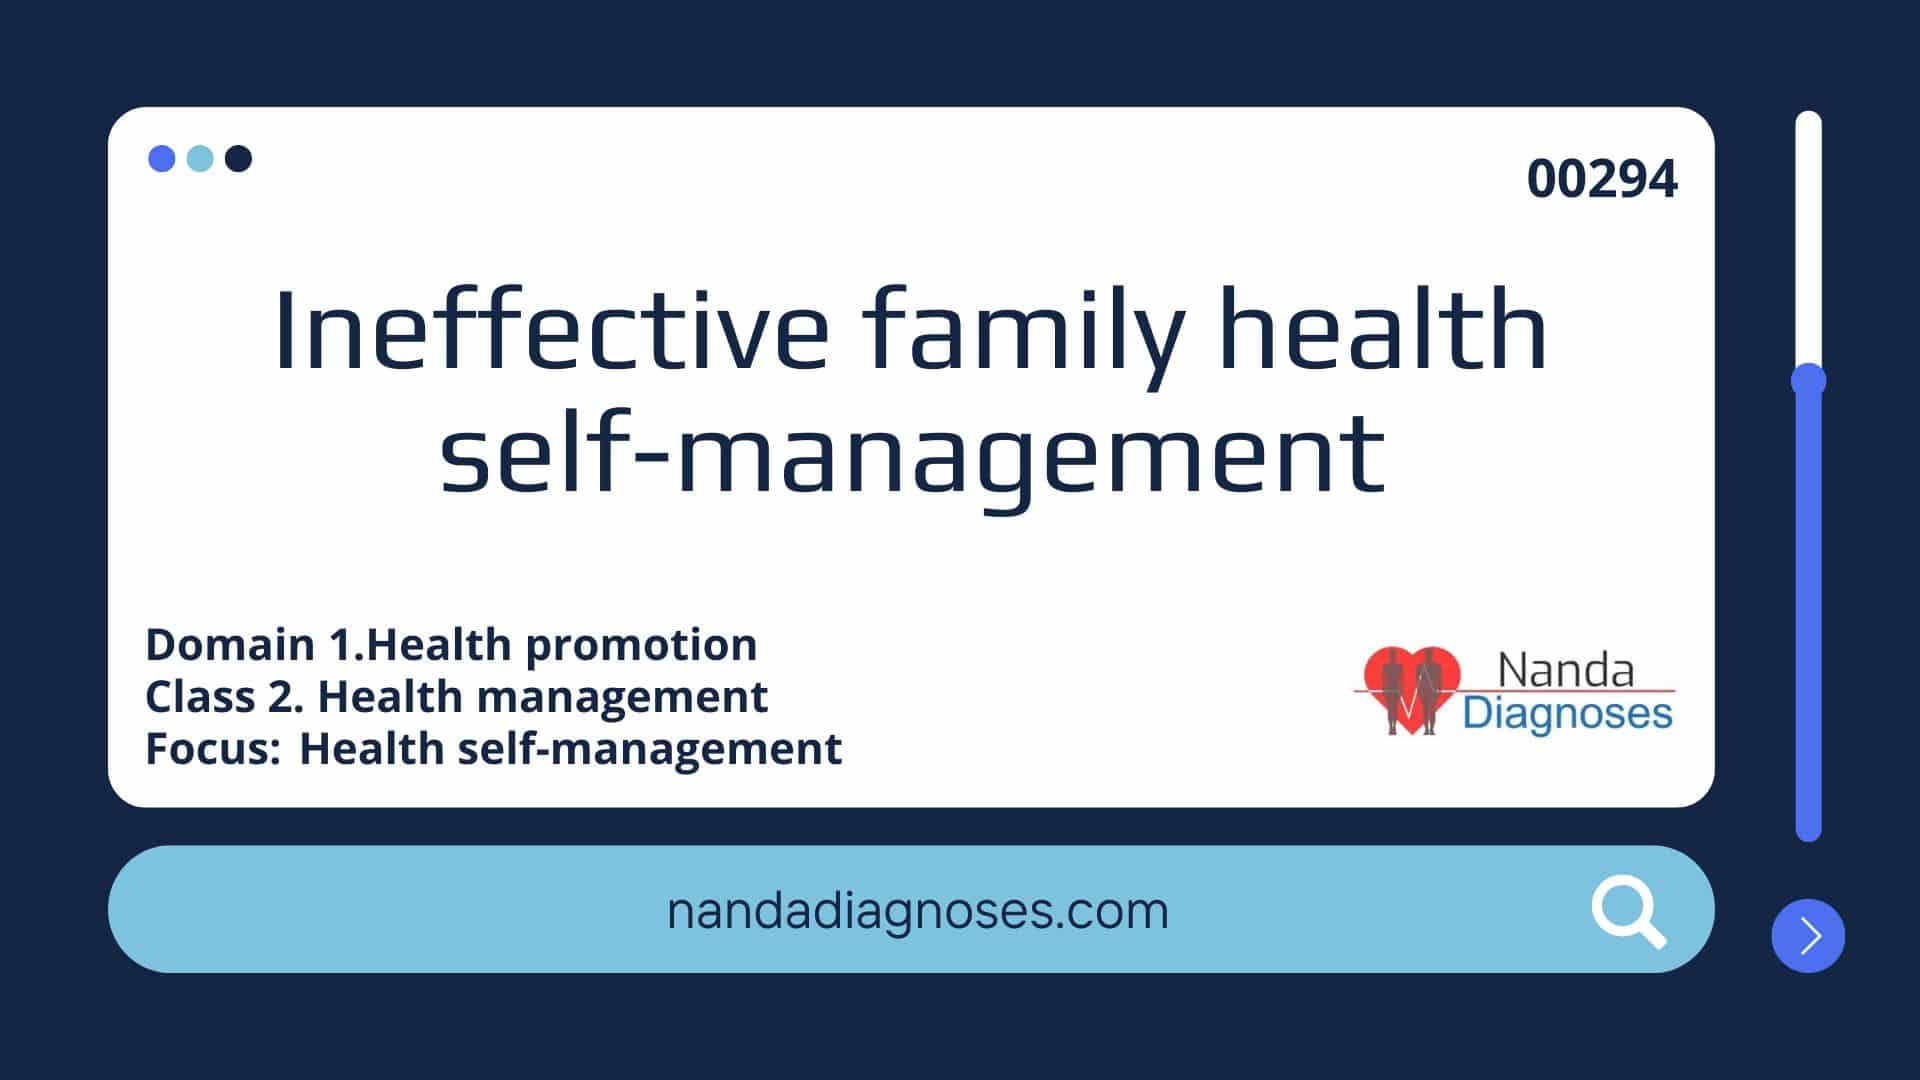 Ineffective family health self-management